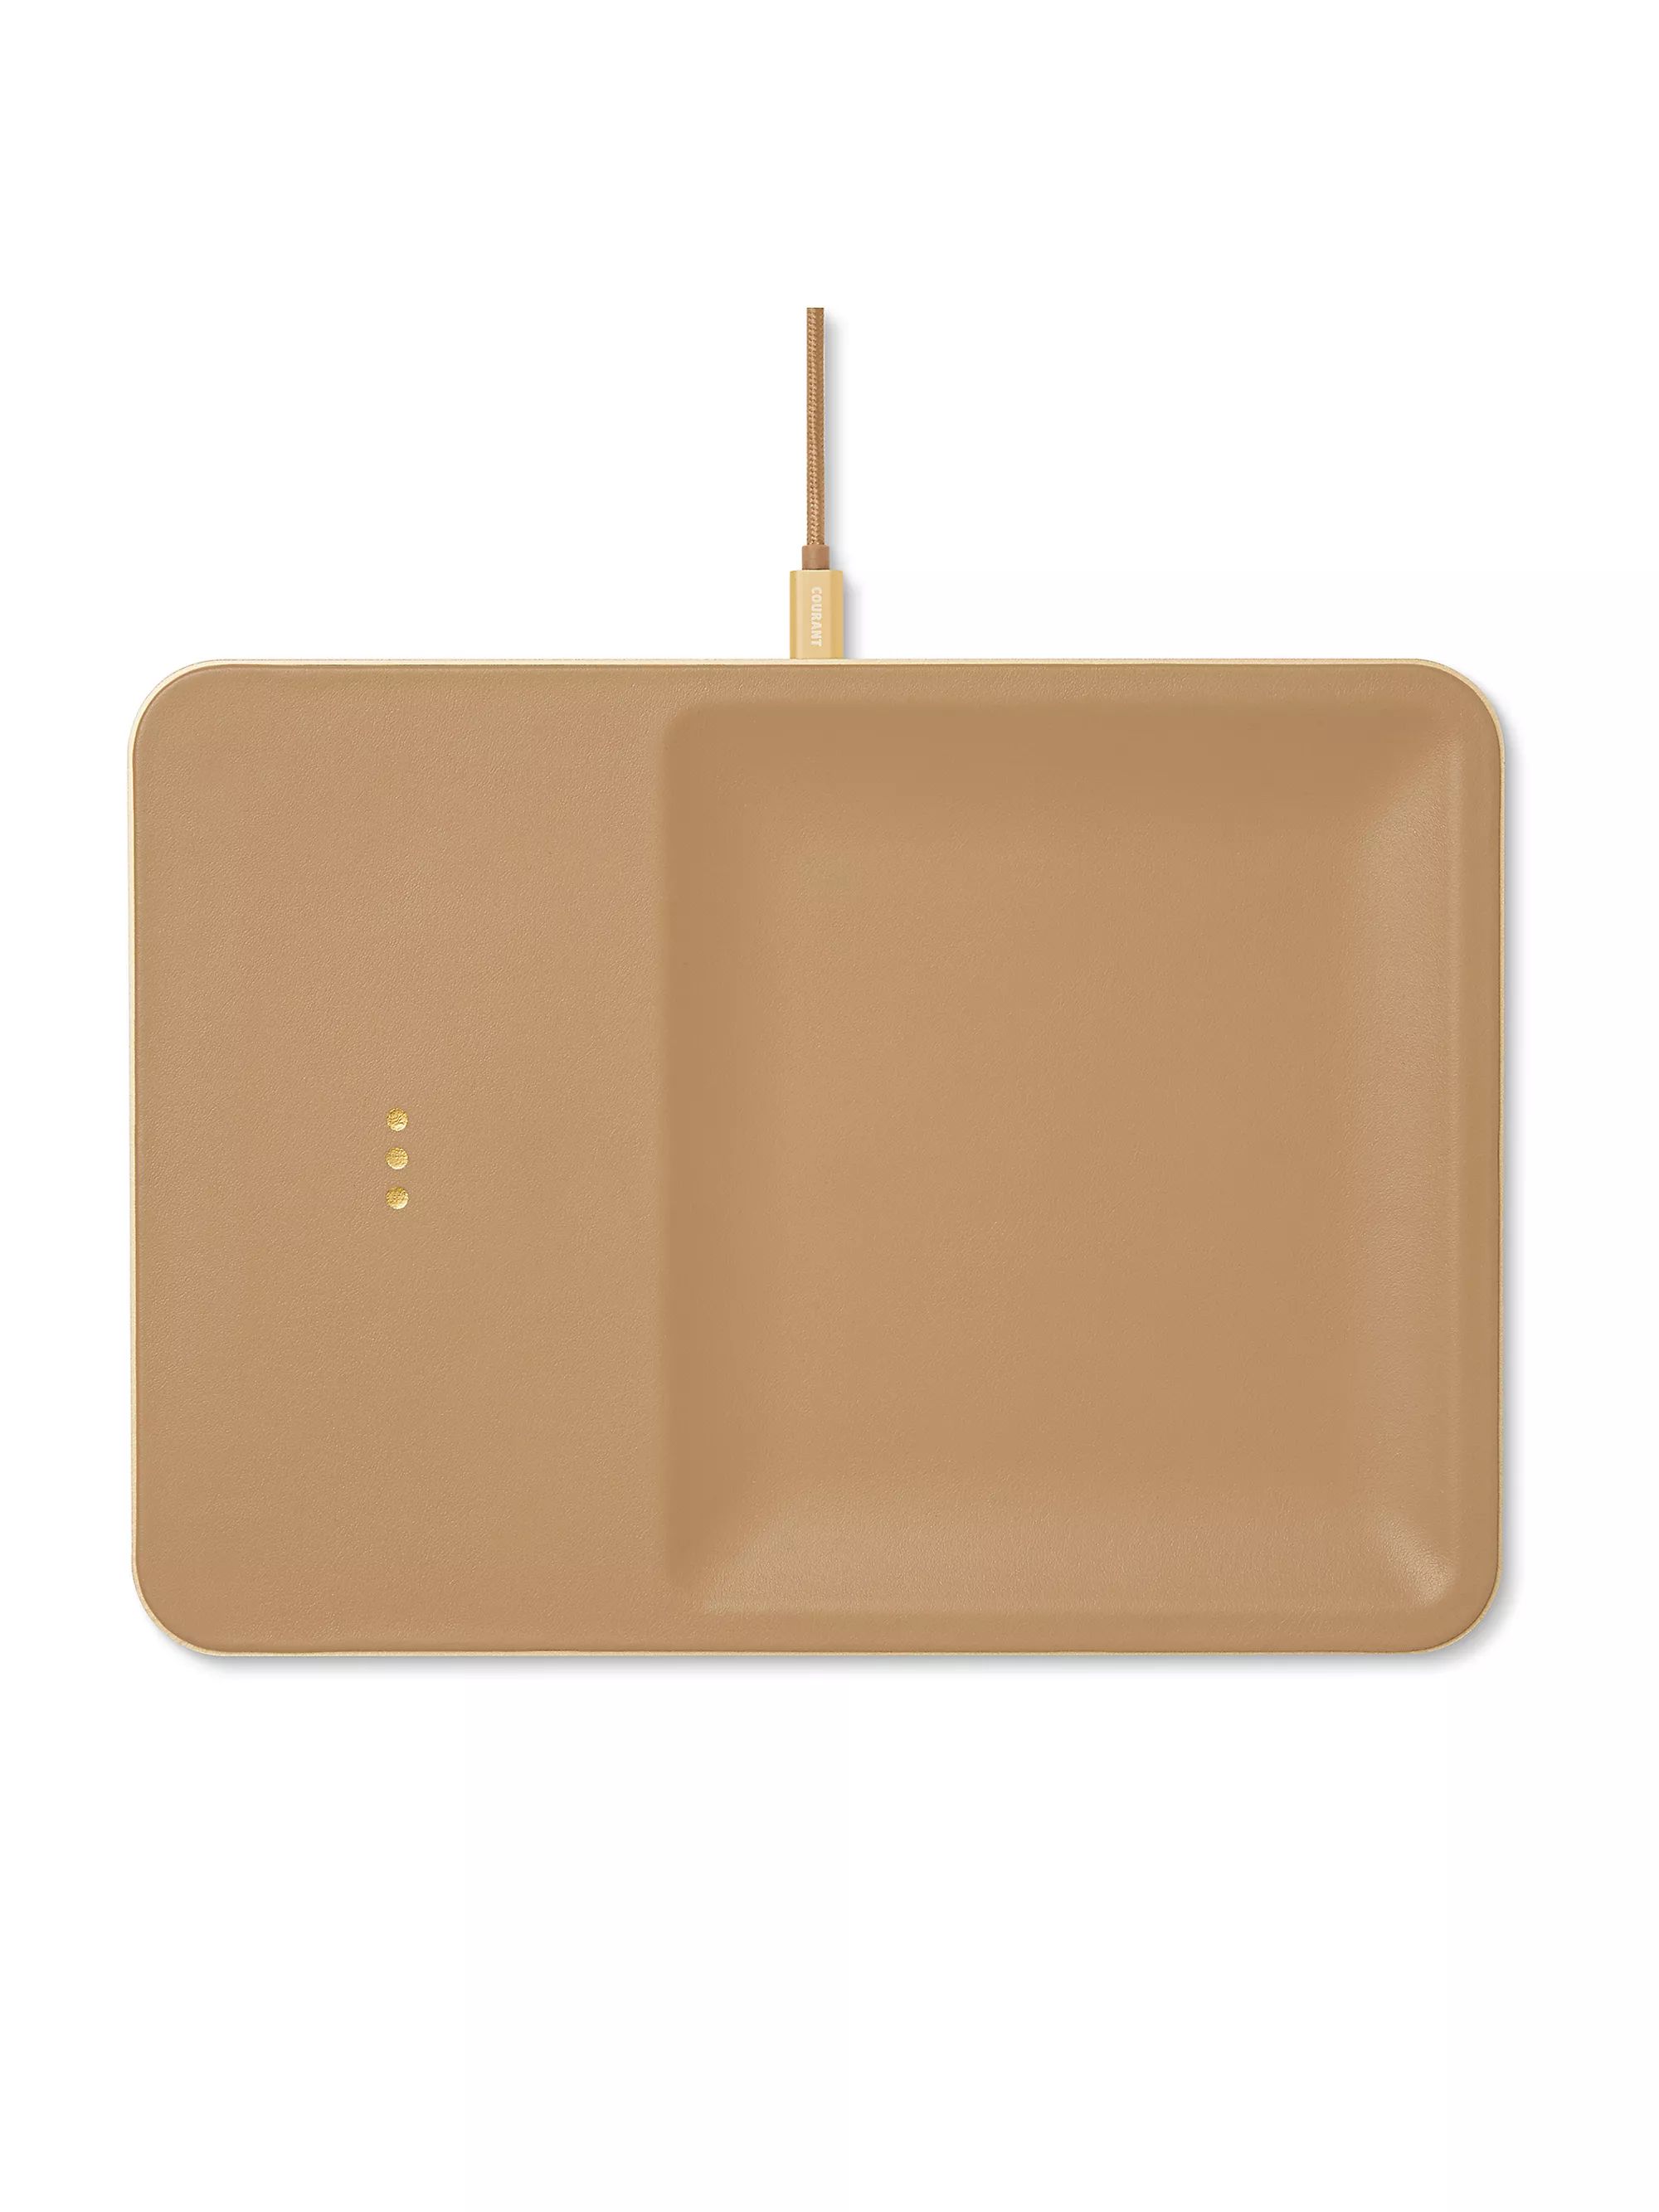 CATCH:3 Classics Wireless Charging Tray | Saks Fifth Avenue